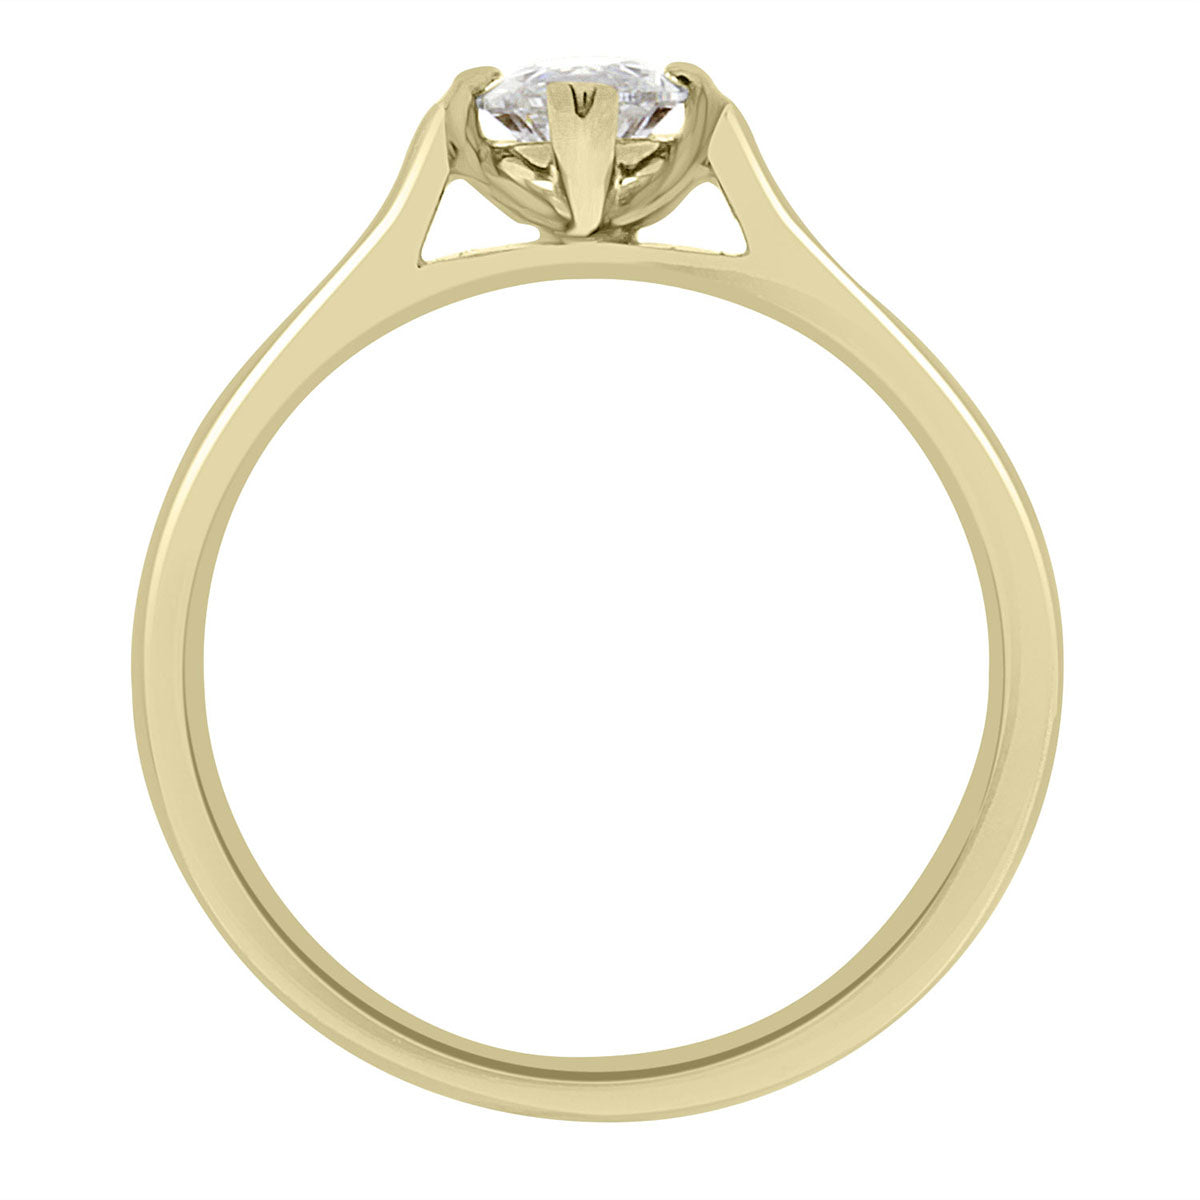 Marquise Solitaire Engagement Ring made from yellow gold standing upright